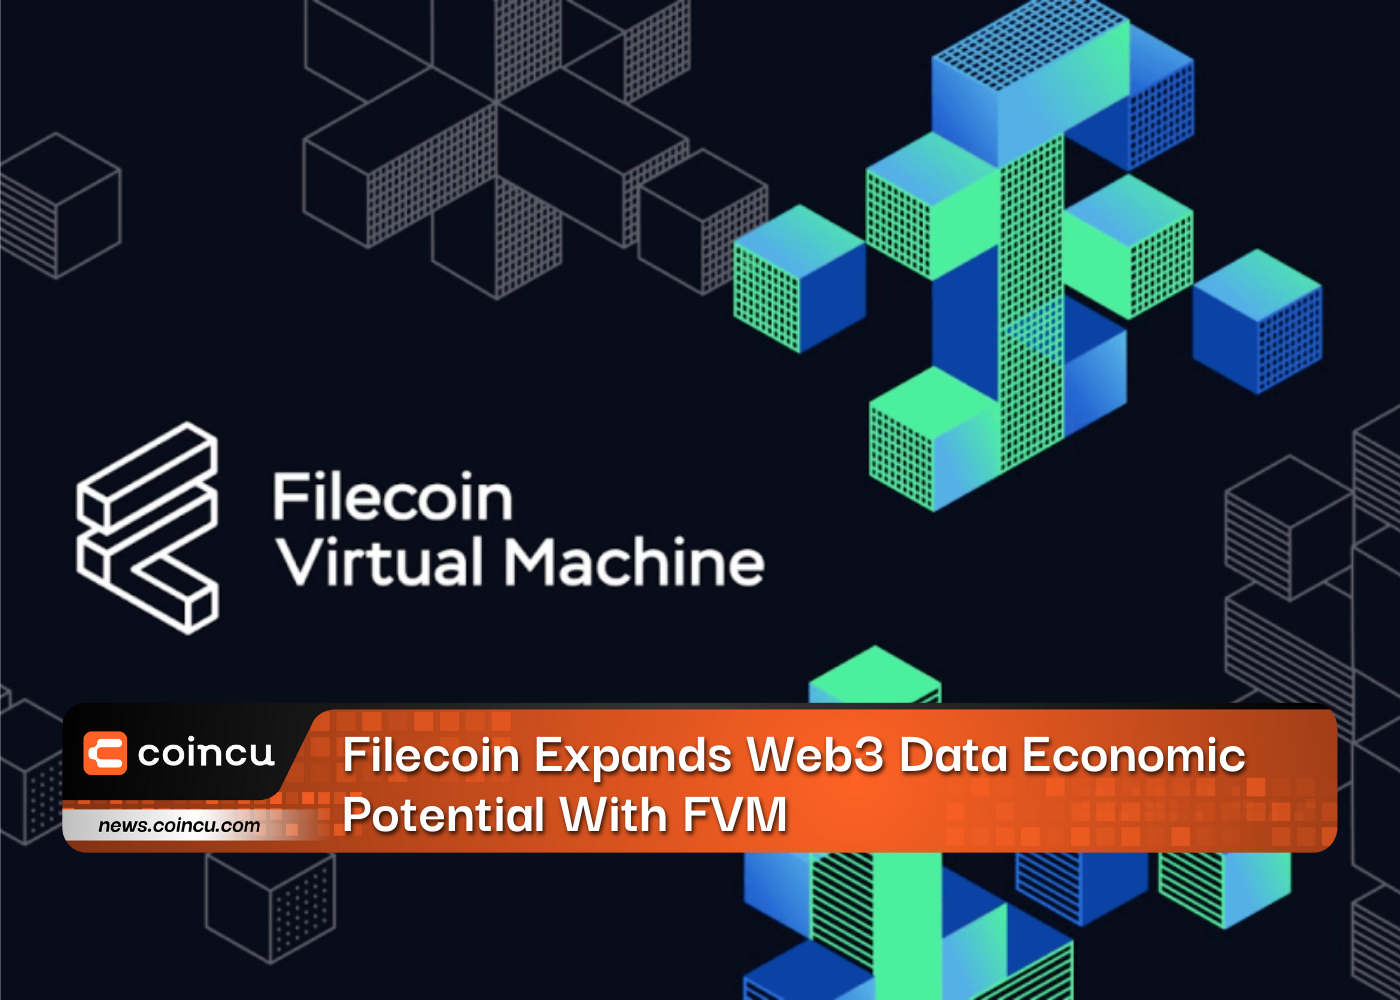 Filecoin Expands Web3 Data Economic Potential With FVM